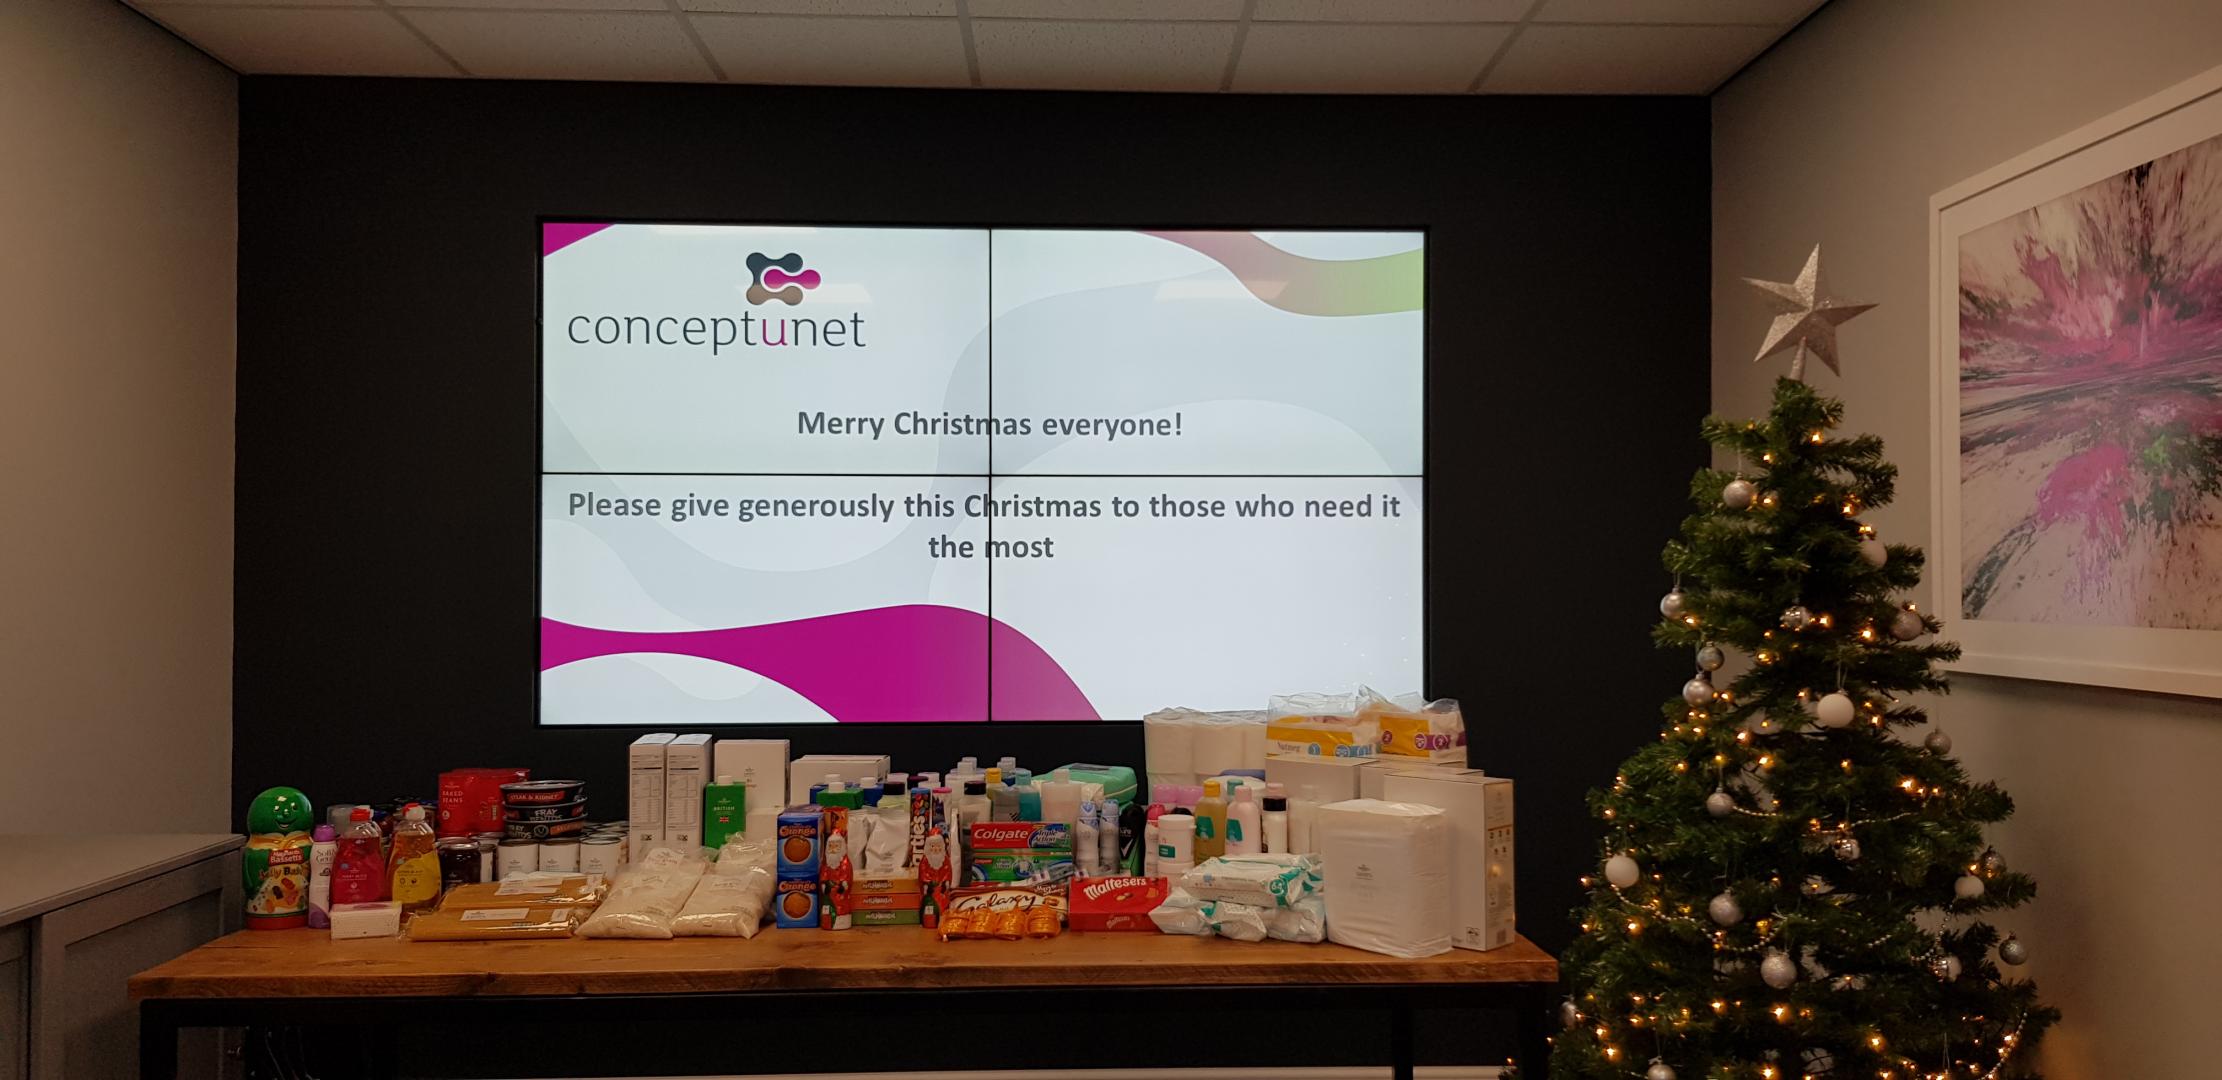 Conceptunet donations to Chesterfield Foodbank